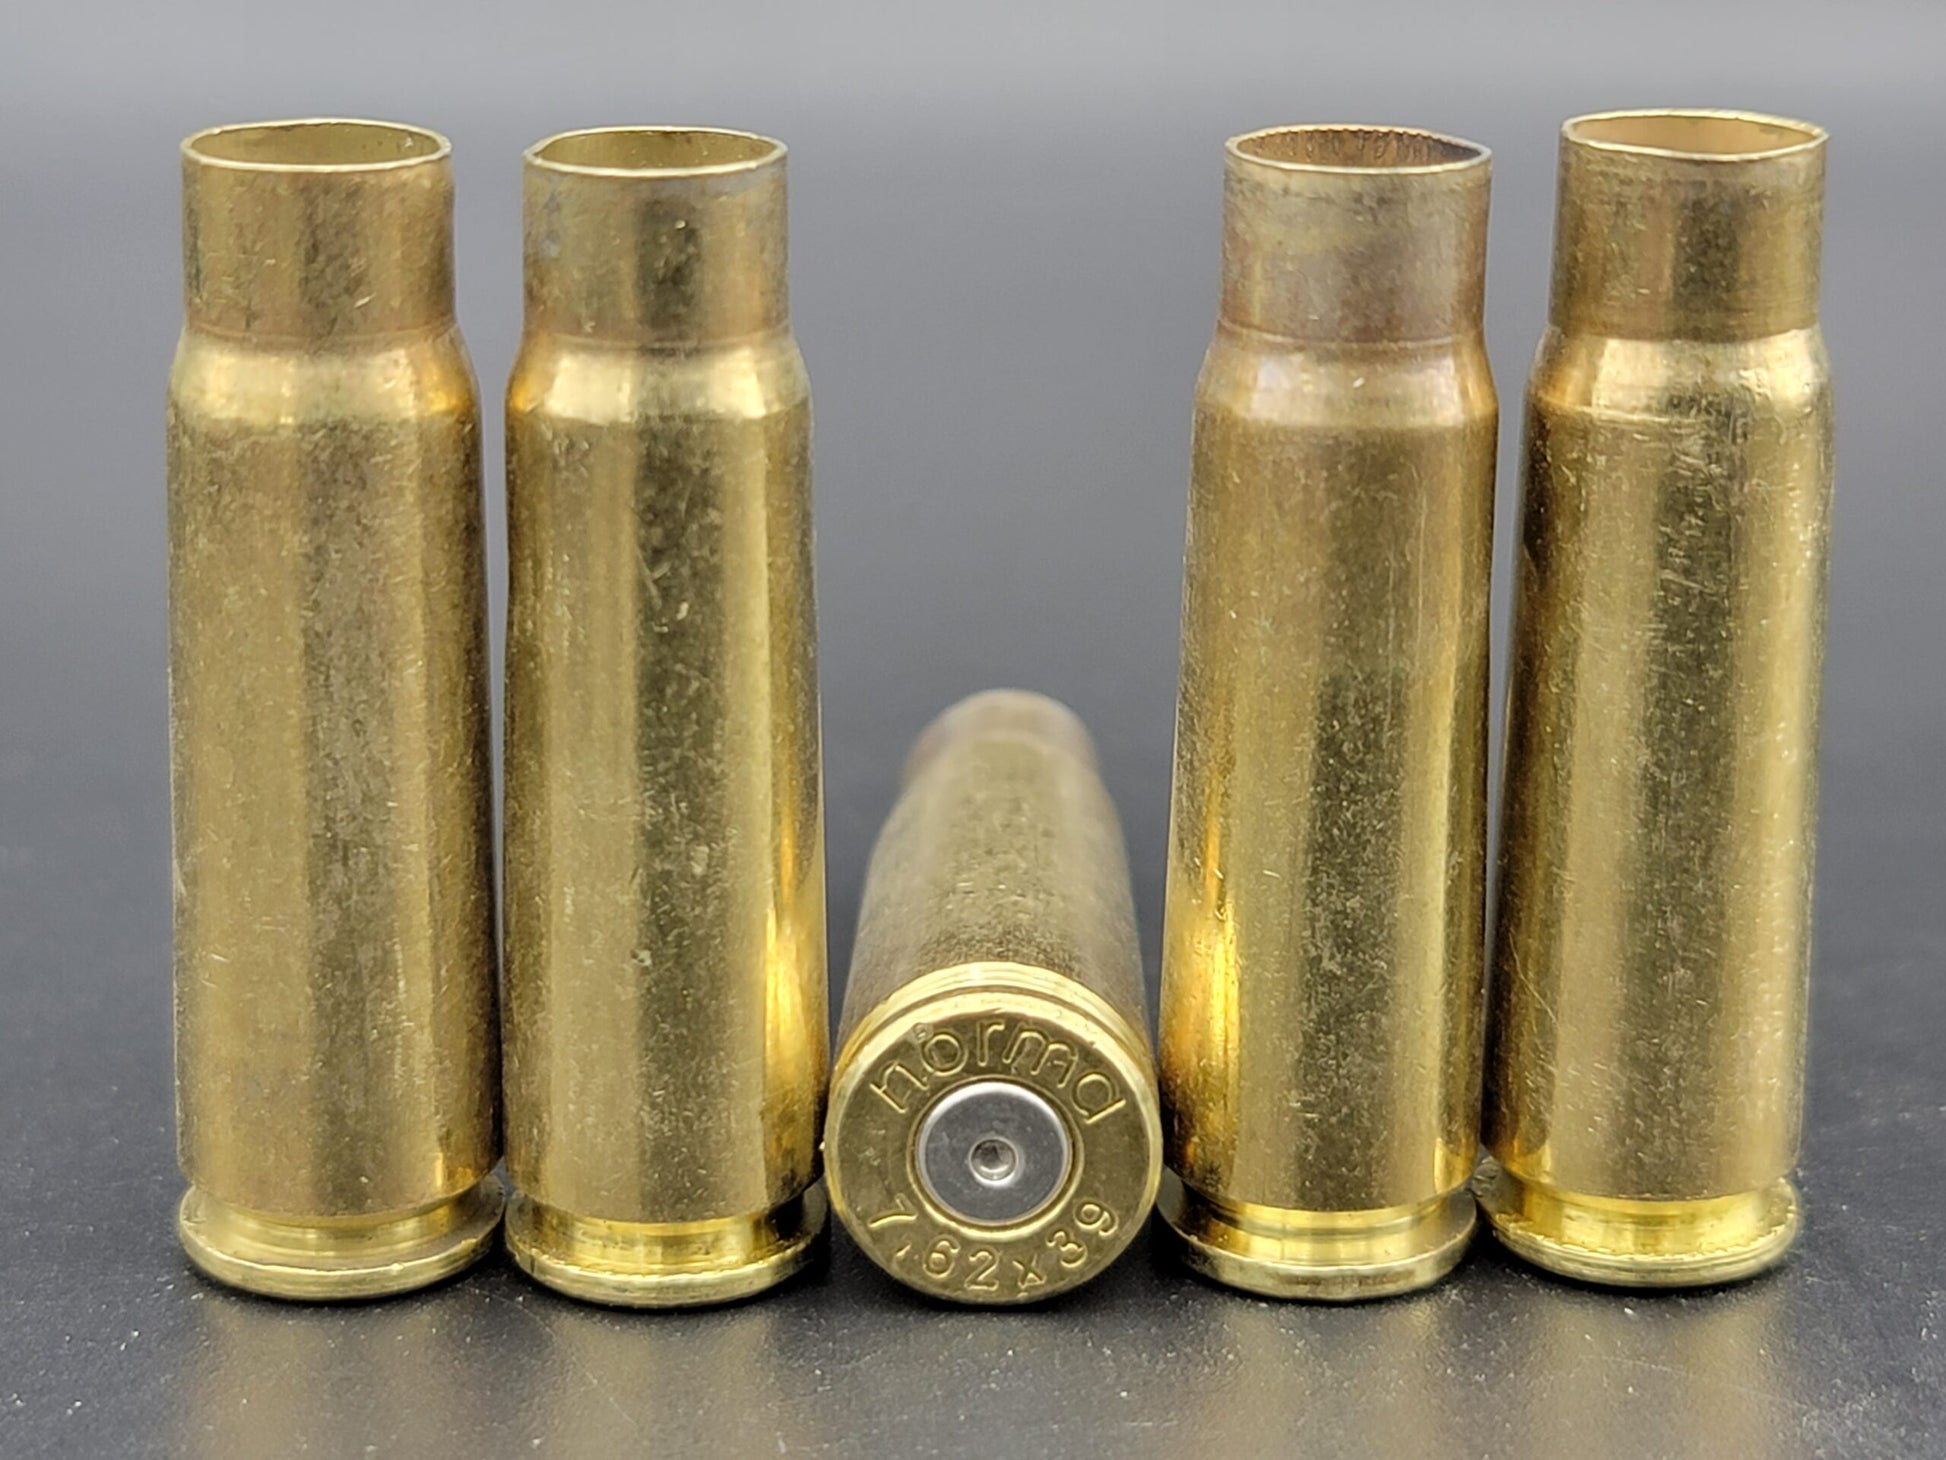 7.62x39 once fired rifle brass. Hand sorted from reputable indoor/military ranges for reloading. Reliable spent casings for precision shooting.